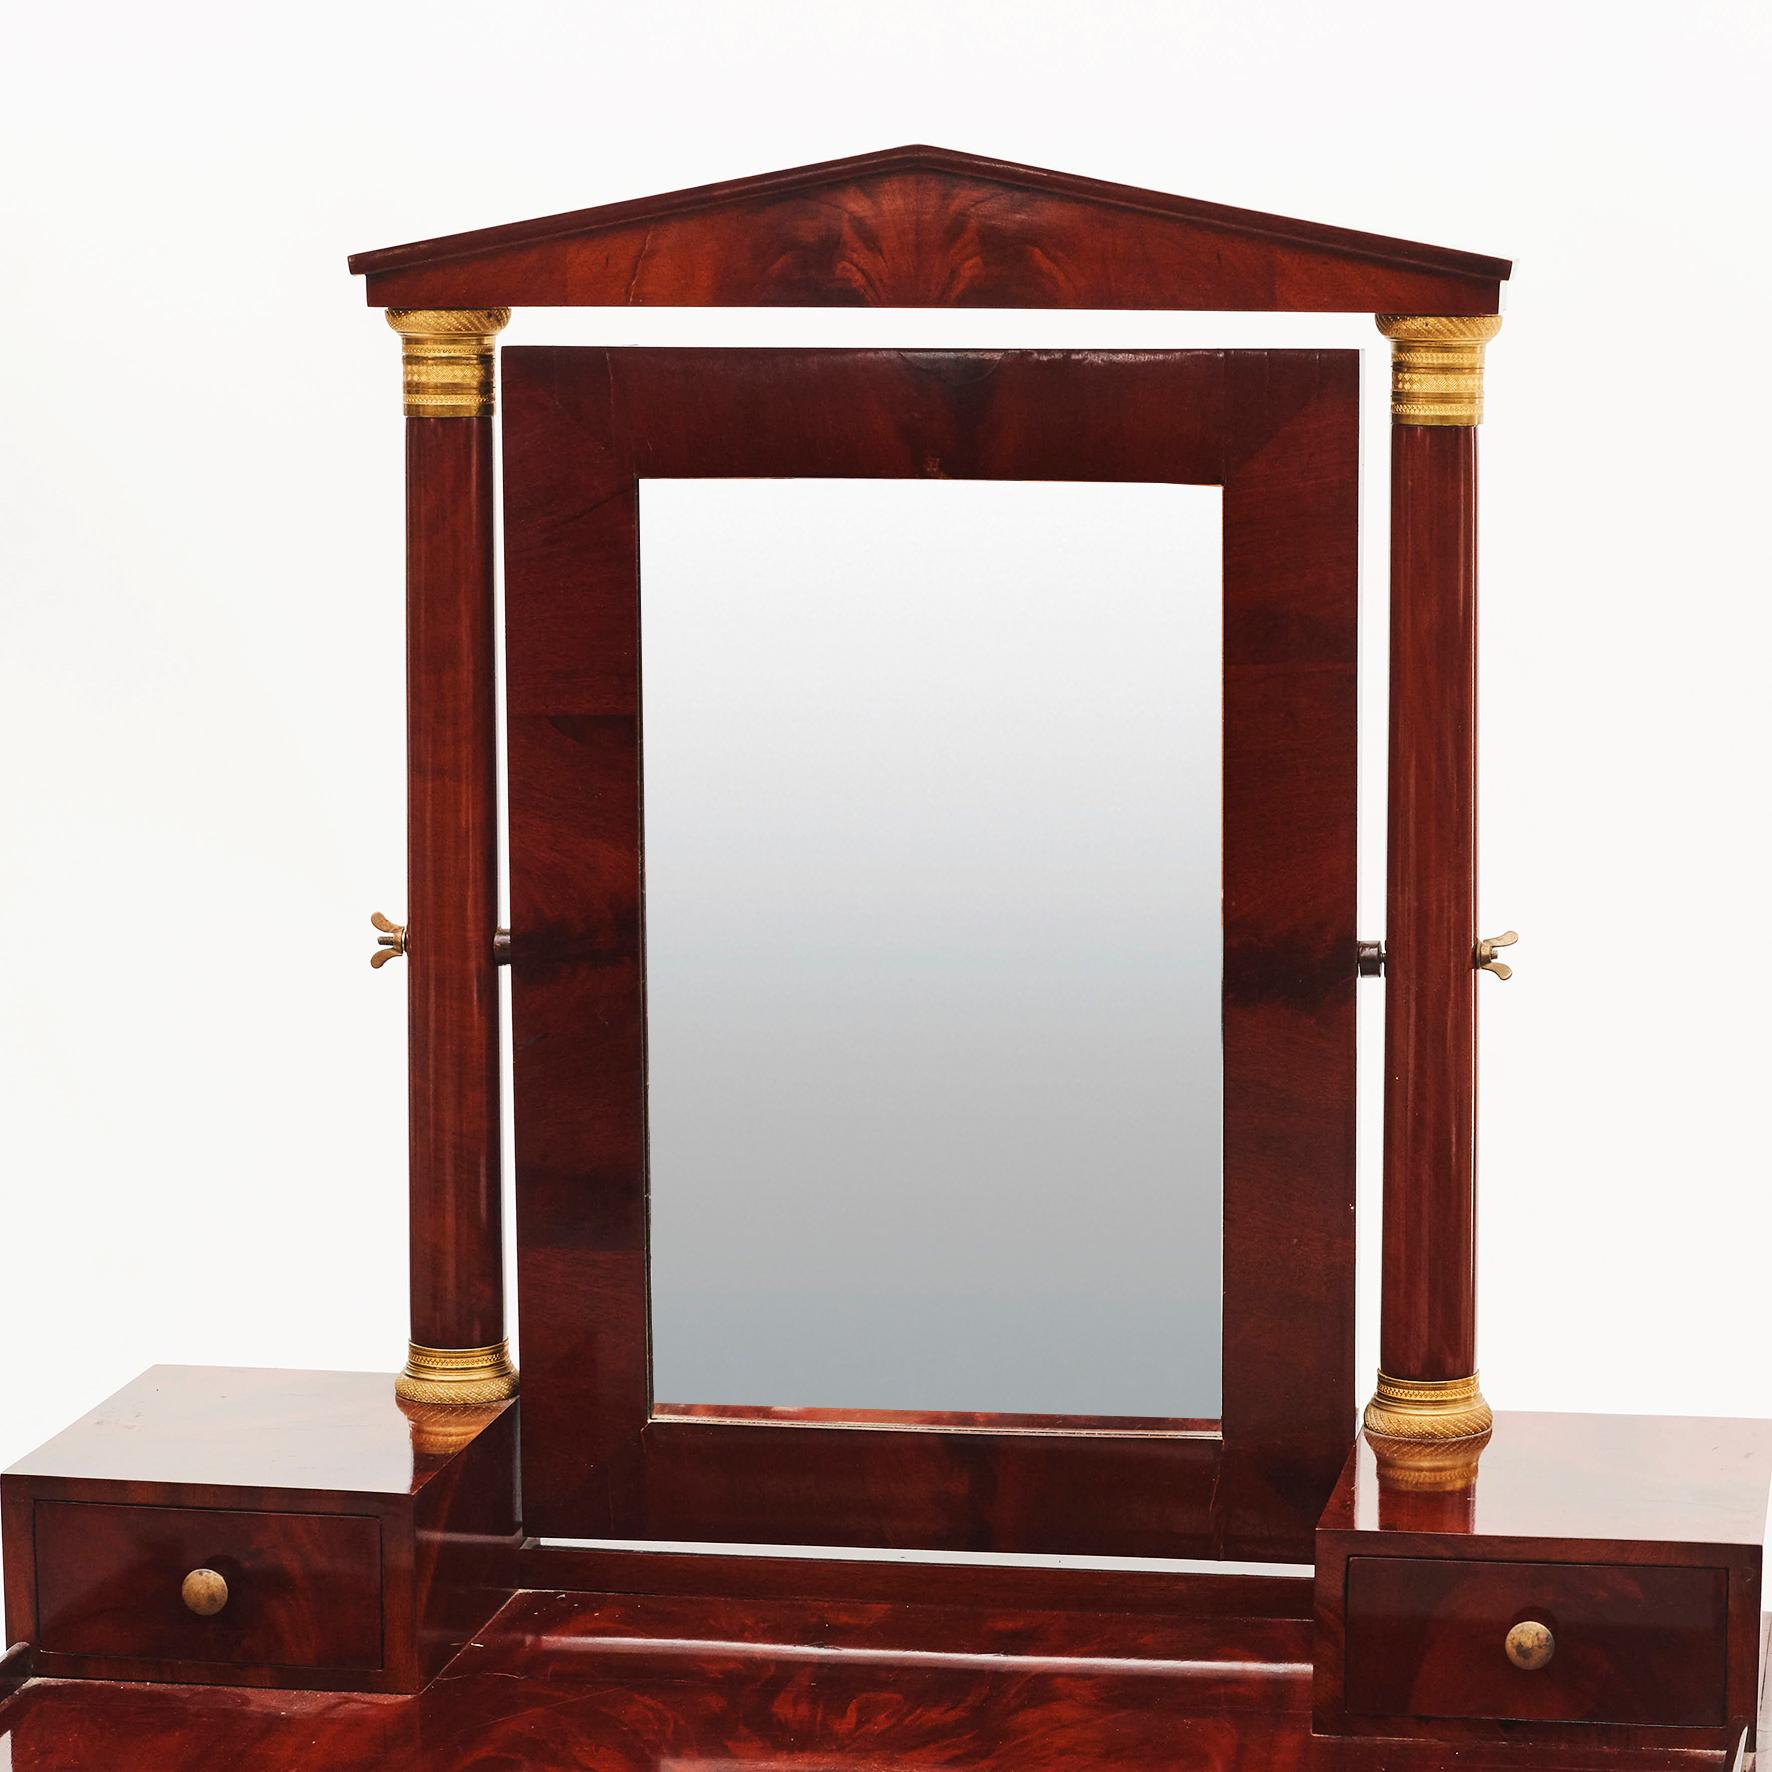 Swedish biedermeier / late empire mahogany mirrored dressing table. Swing mirror supported by gilt fluted columns, lyre shaped pedestal on brass ball feet.
Sweden, circa 1820.